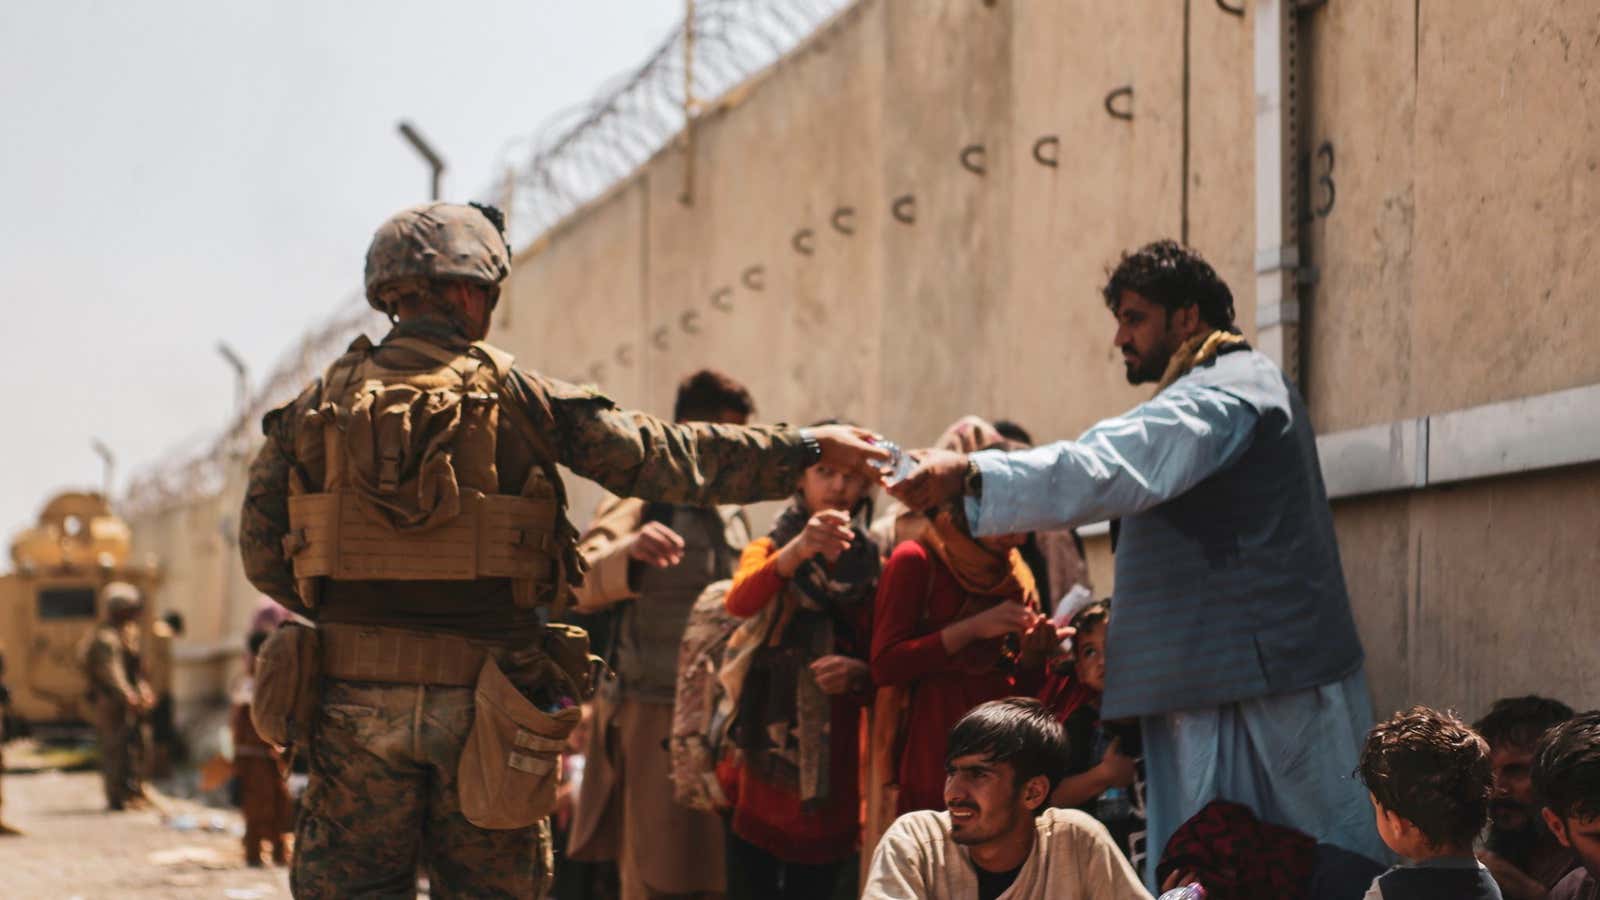 Hundreds of Afghan citizens are fleeing their home country, after the US’ recent withdrawal.